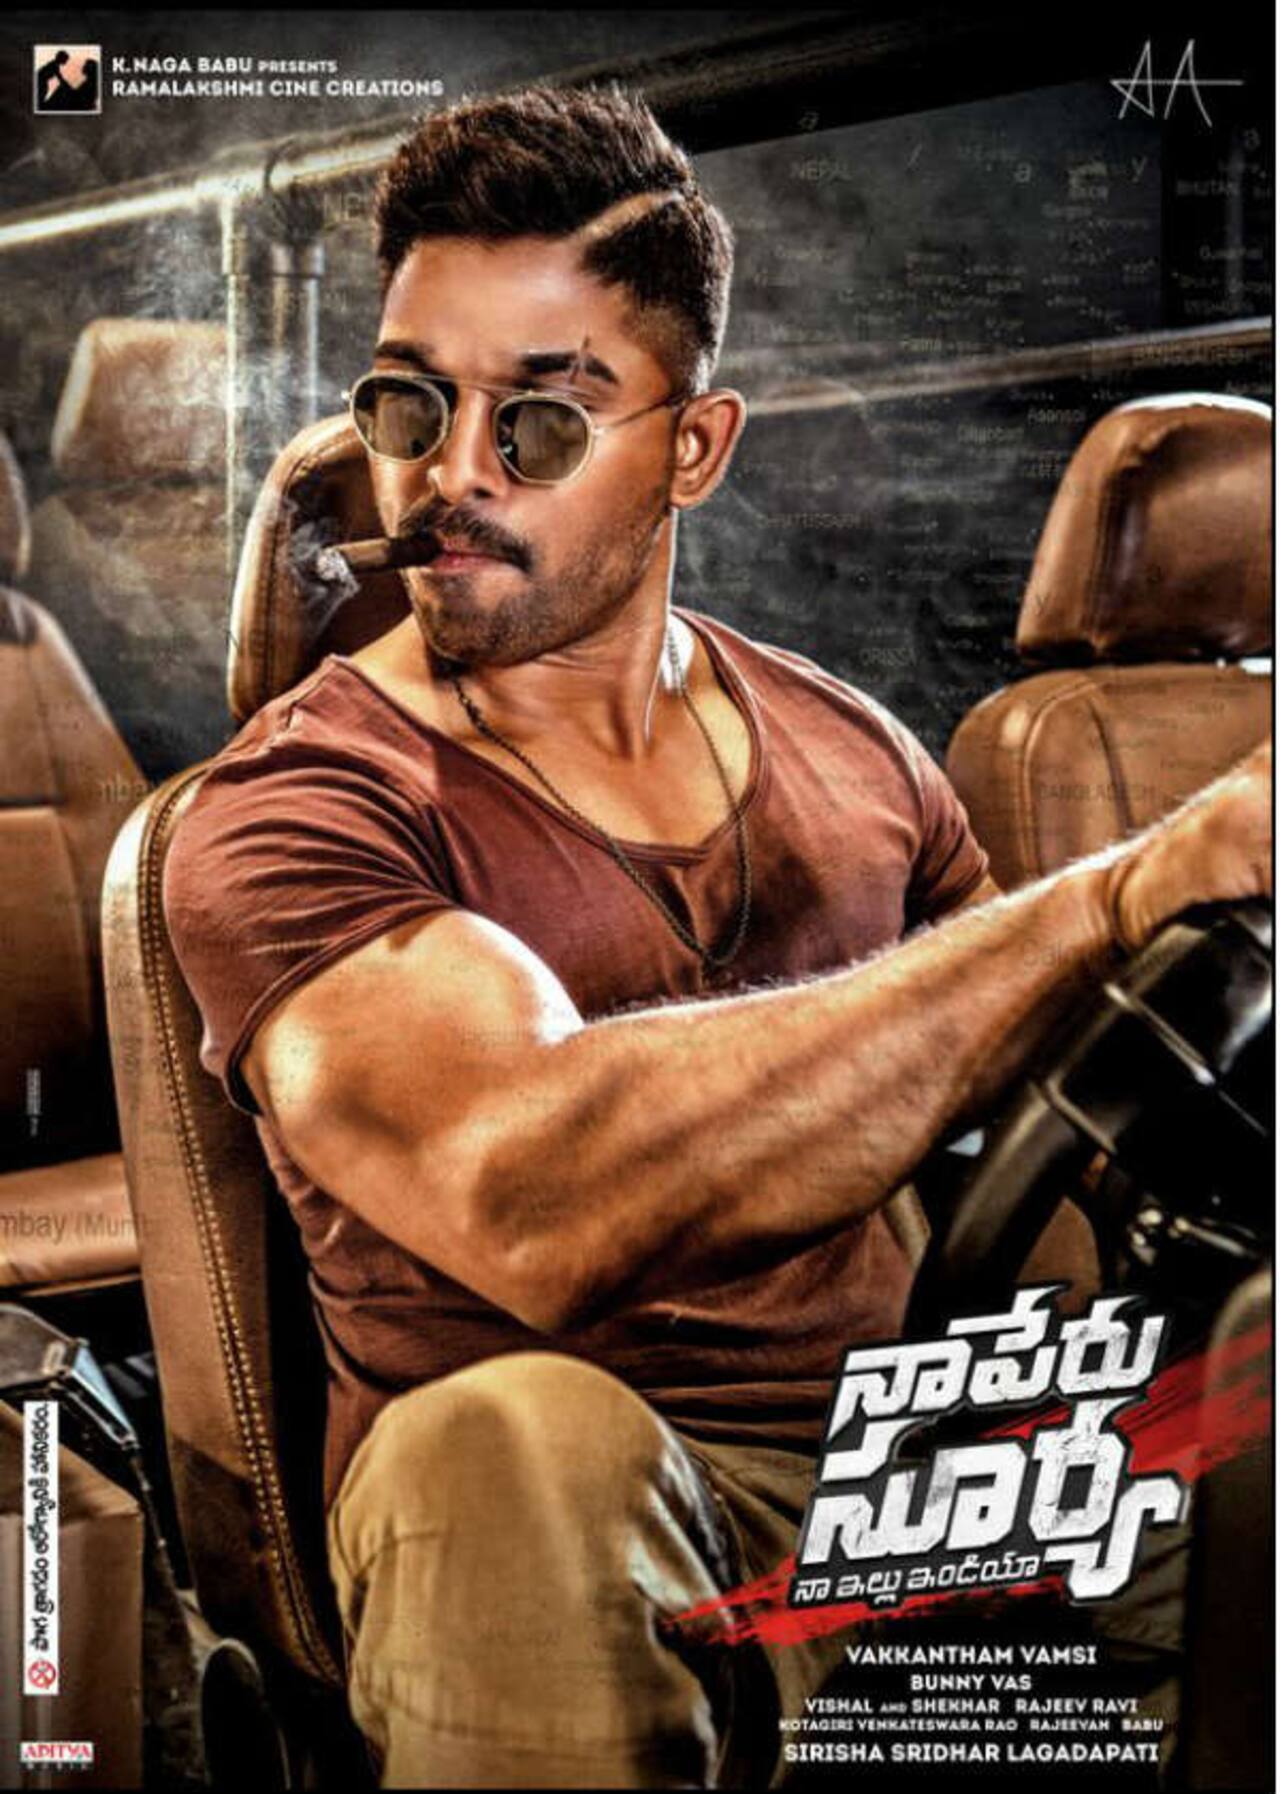 Naa Peru Surya new poster: Allu Arjun is oozing a lot of swag in this one -  view pic - Bollywood News & Gossip, Movie Reviews, Trailers & Videos at  